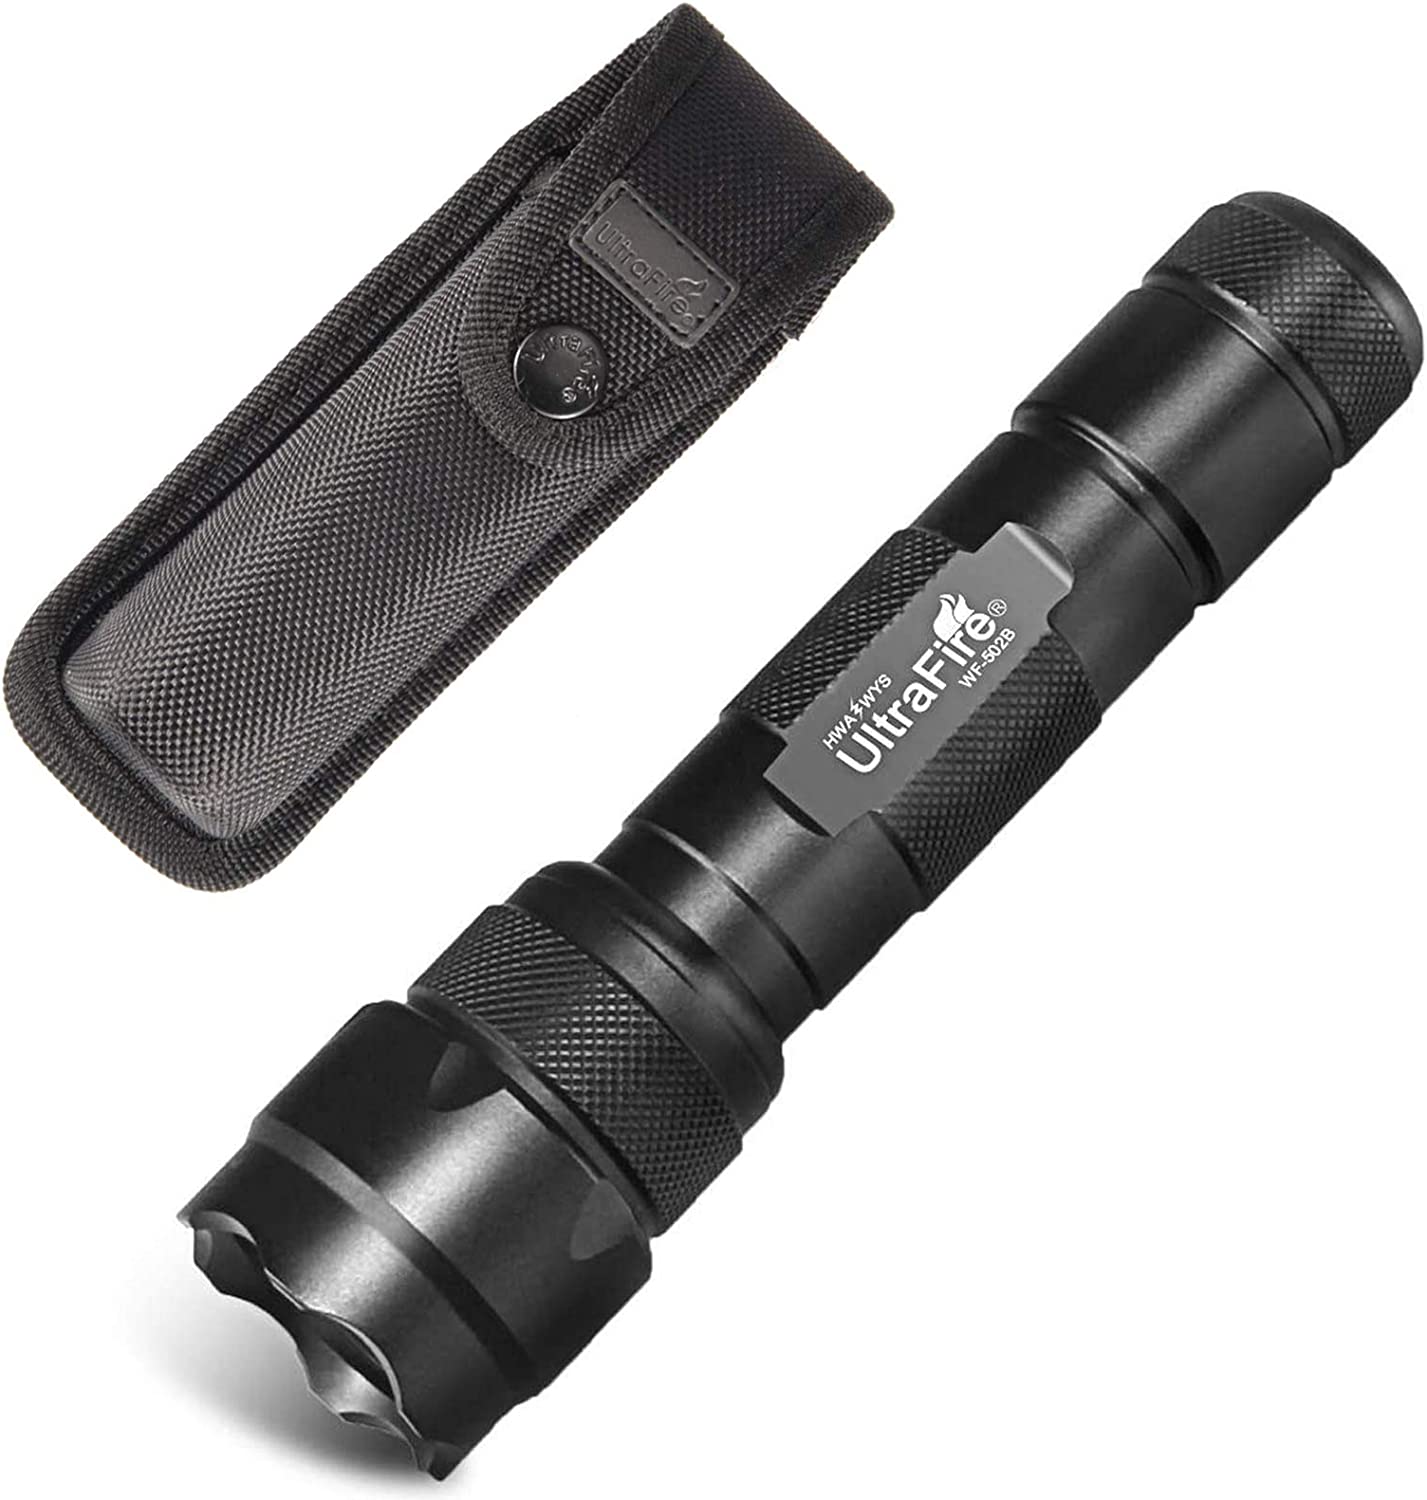 UltraFire 502B Mini LED Flashlight 1000 Lumens Single Mode Tactical Flashlight with Flashlight Holster, Bright Waterproof Small Handheld Flashlight for Camping Outdoor Emergency (Battery Not Included)